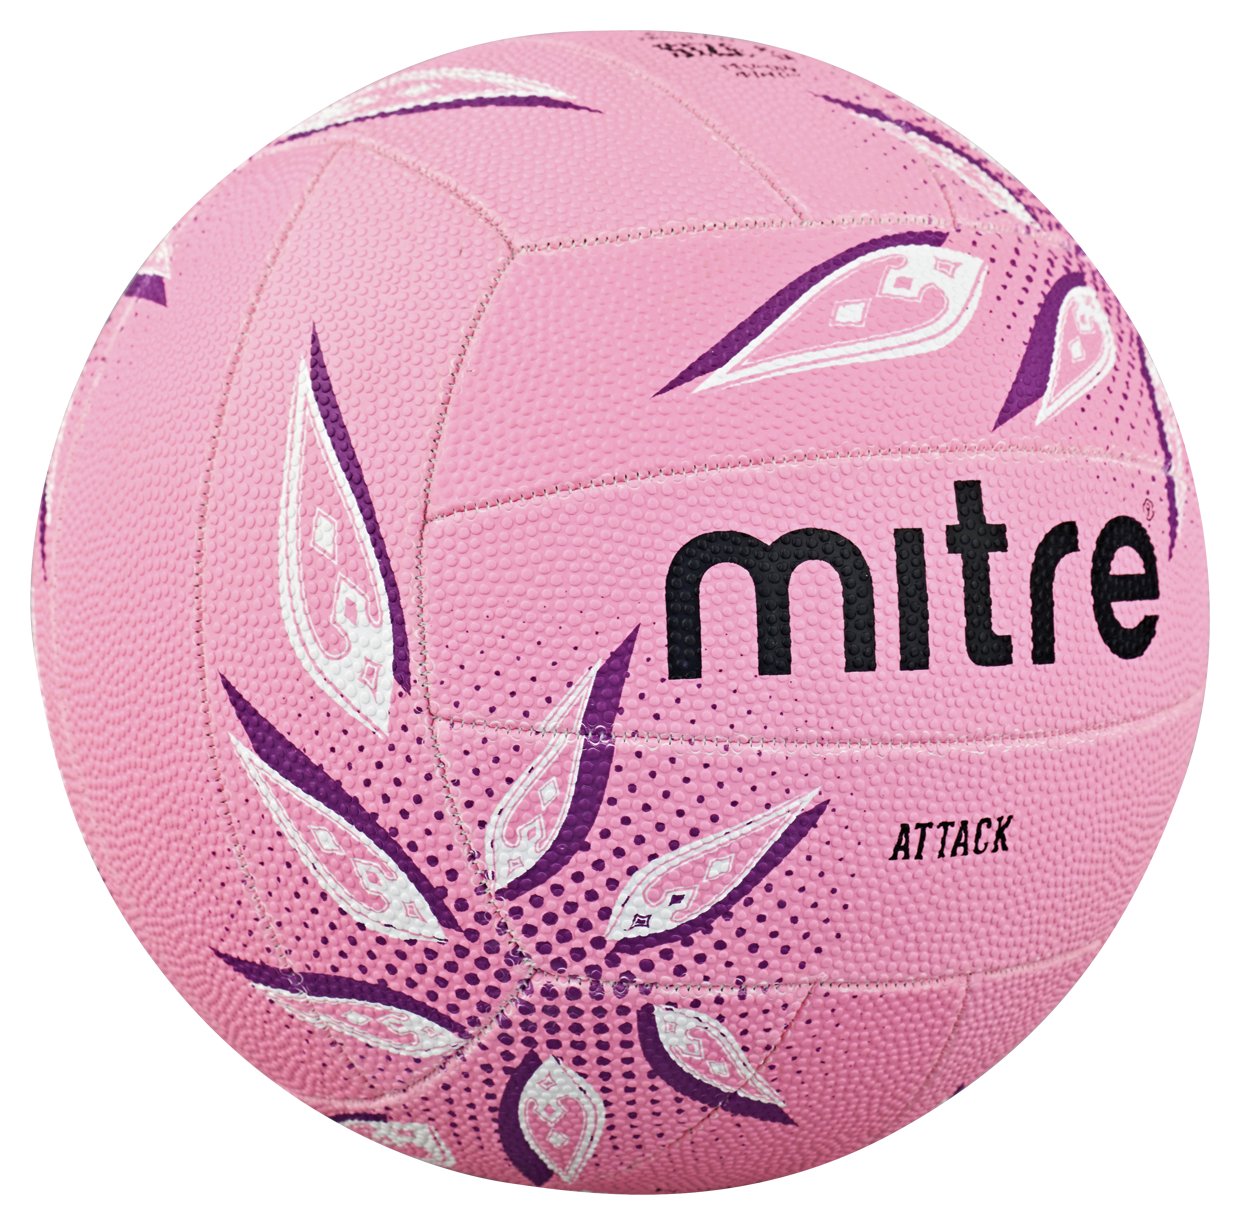 Mitre Attack Netball - Pink